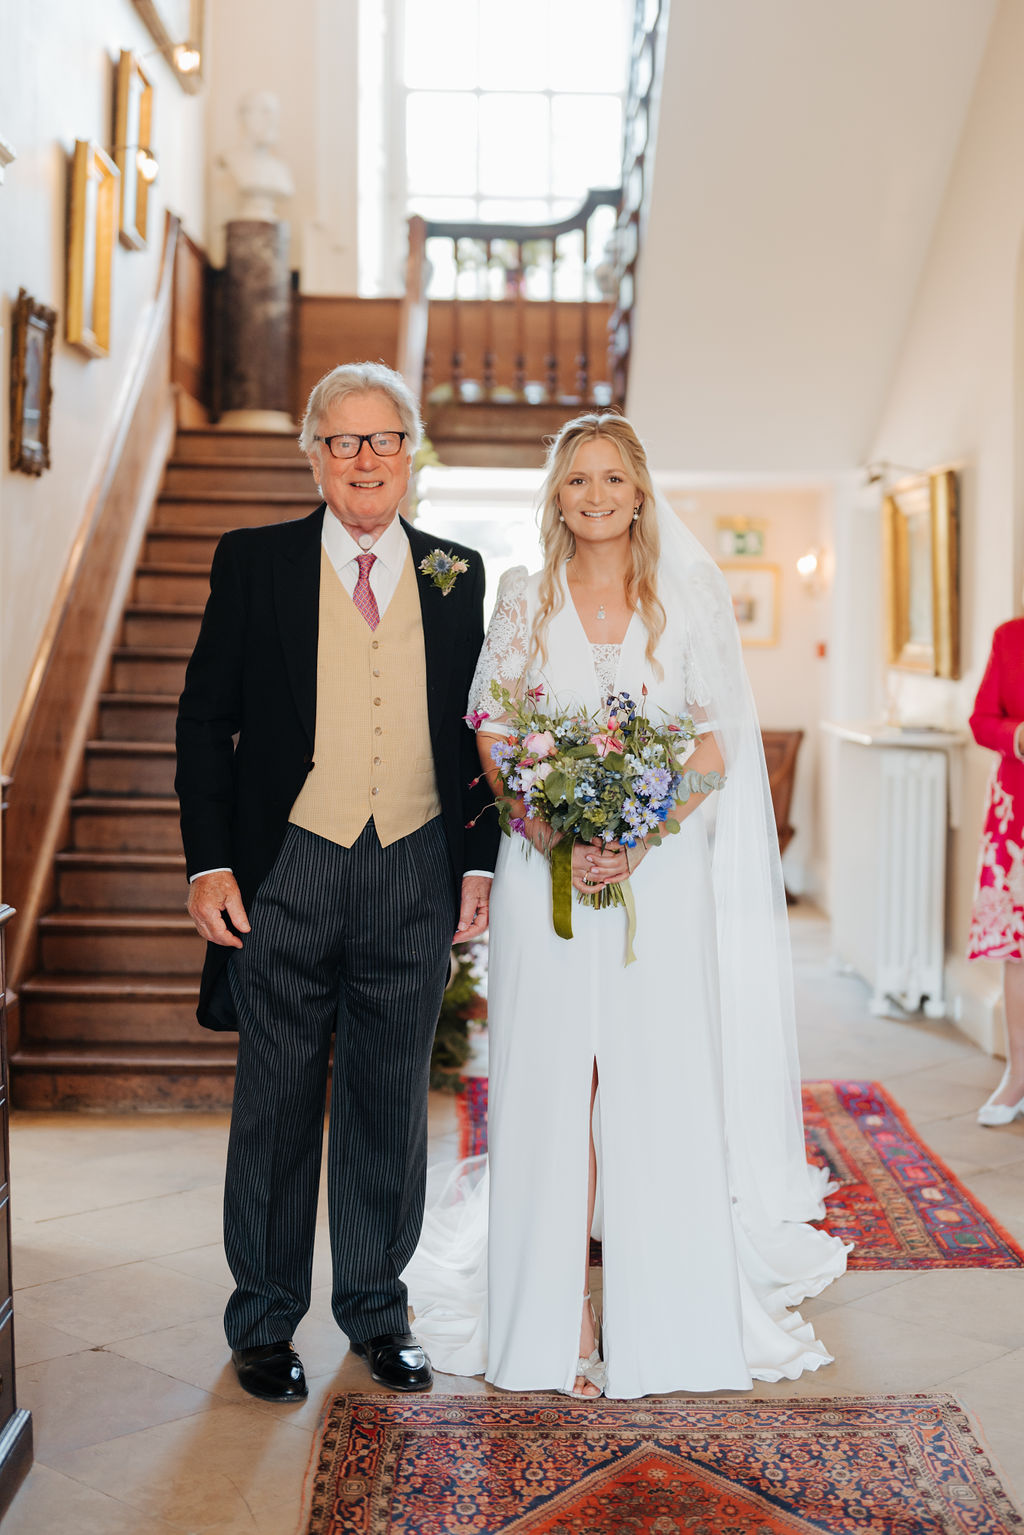 A man wearing a morning suit stands next to his daughter who is wearing a white lace wedding dress and holding a pastel coloured bouquet with an antique wooden staircase in the background behind them.